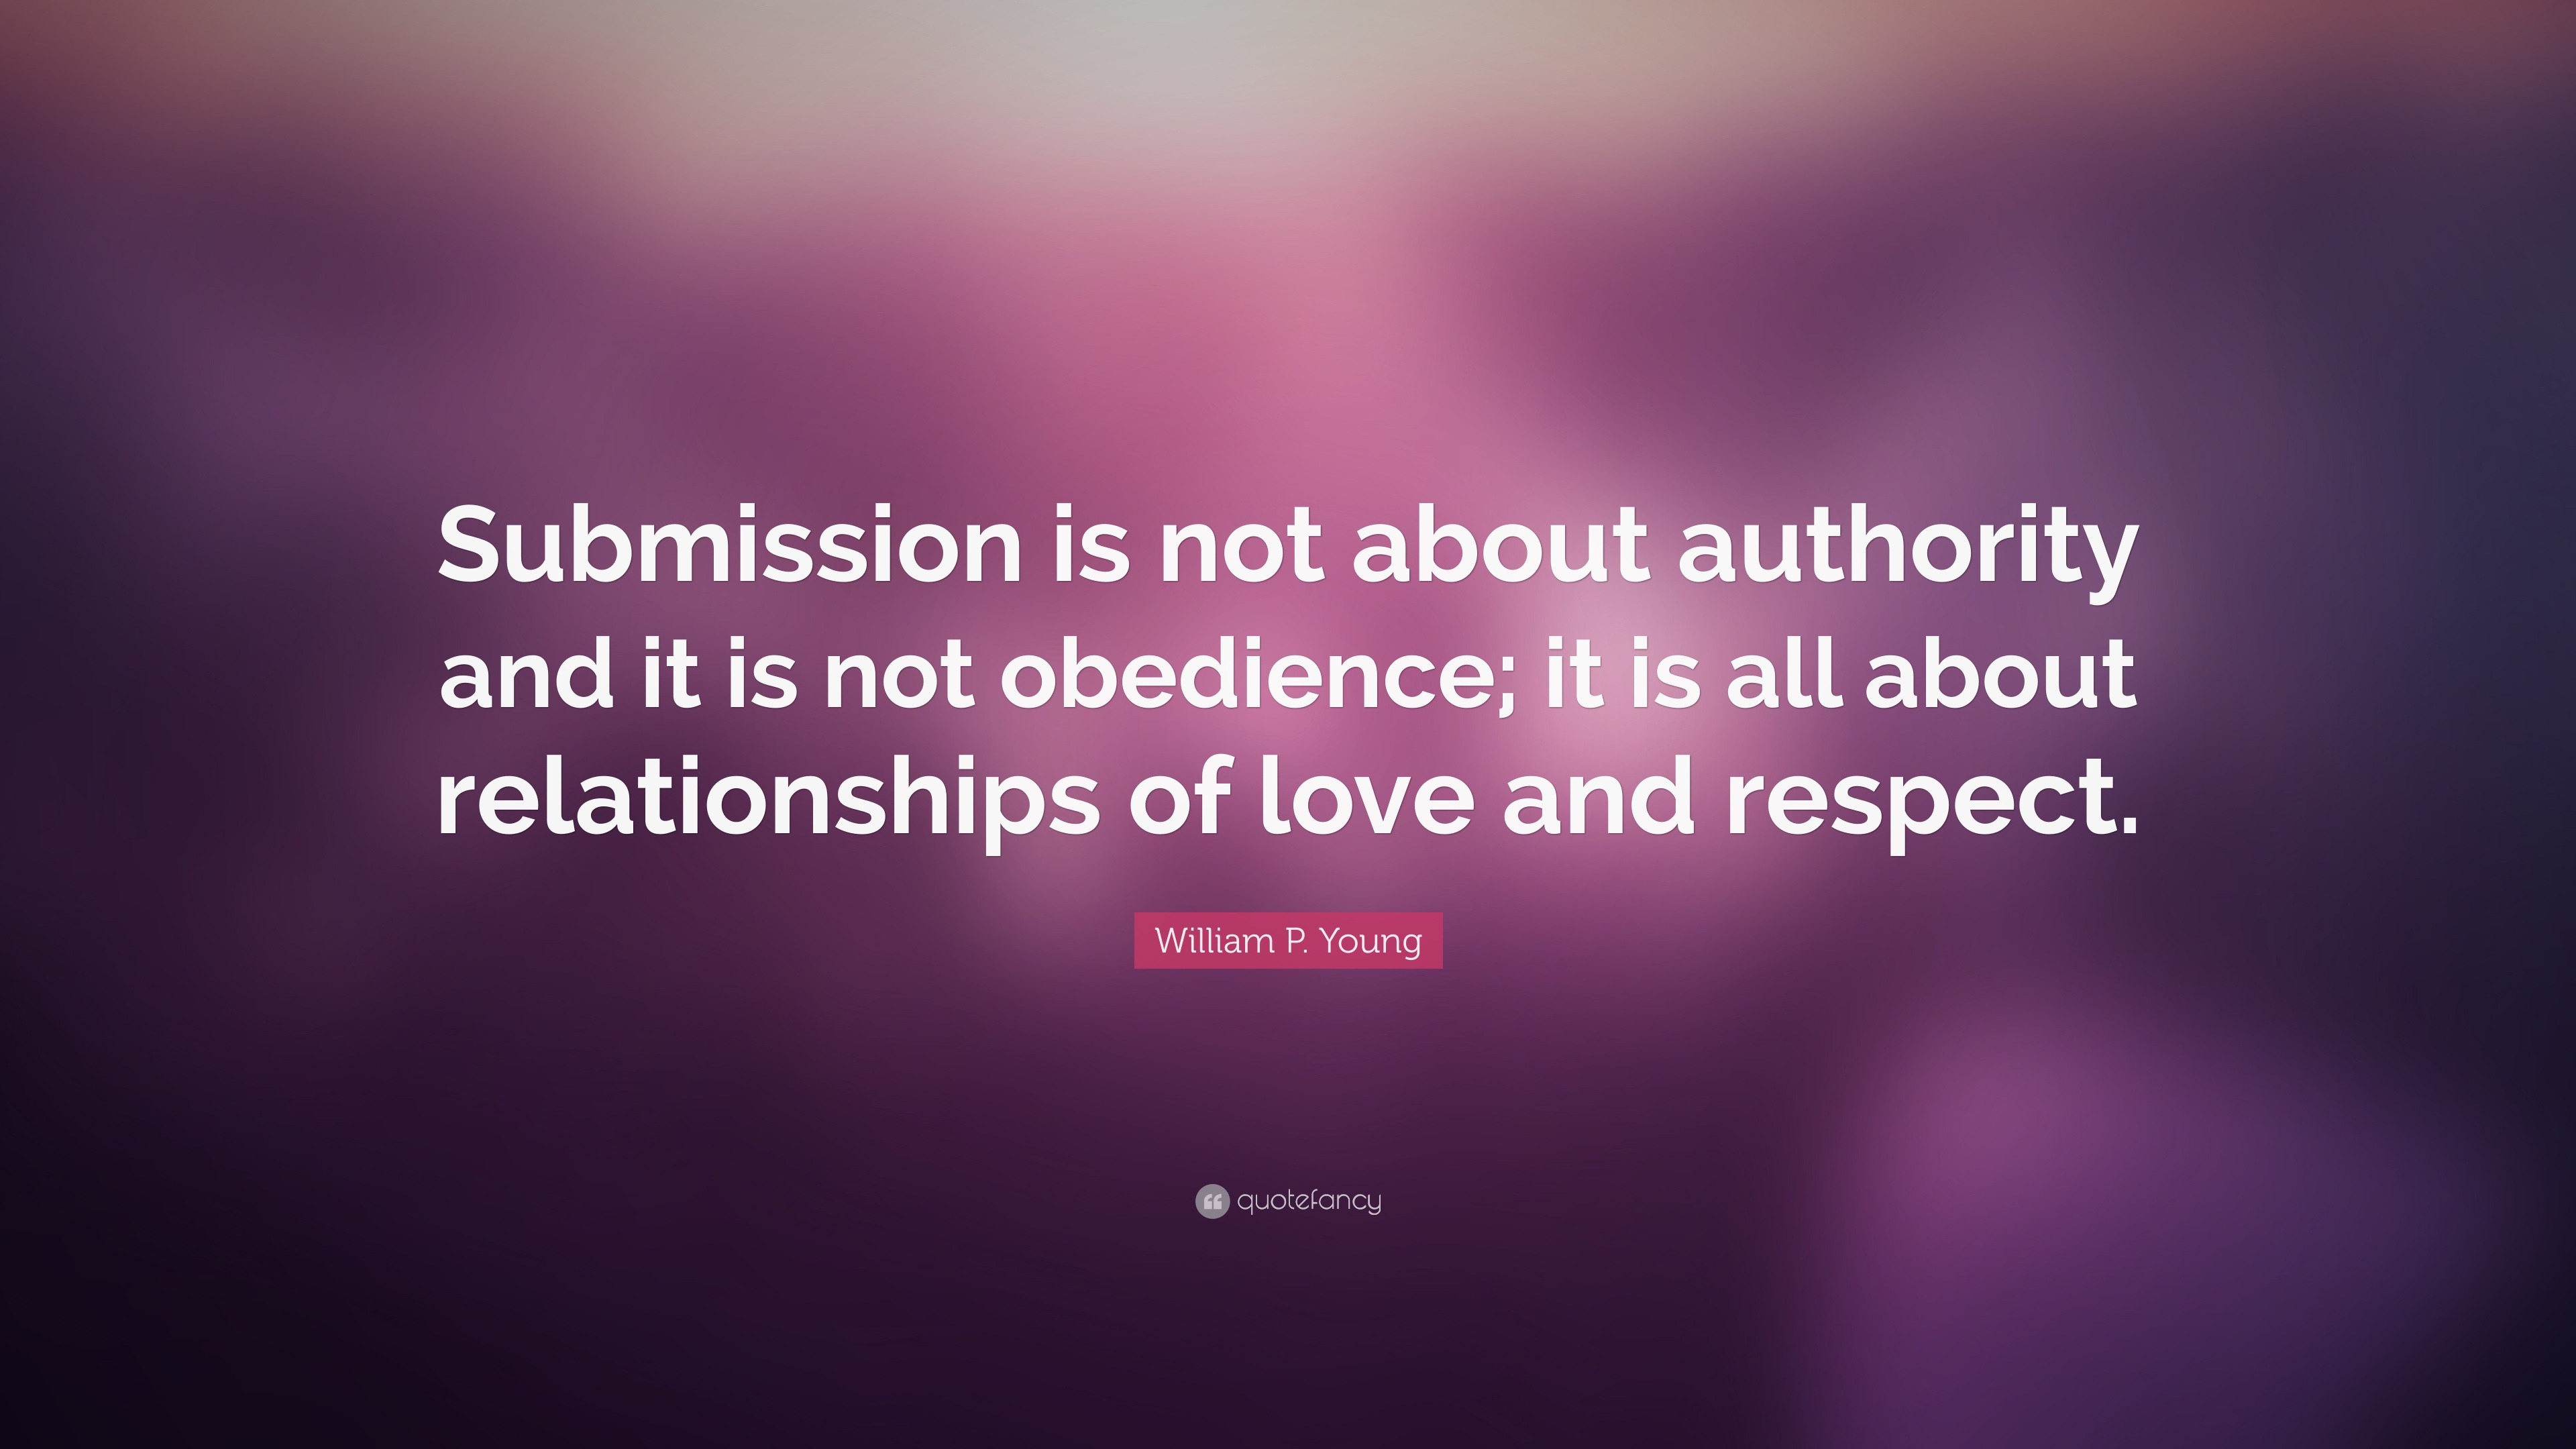 William P Young Quote “Submission is not about authority and it is not